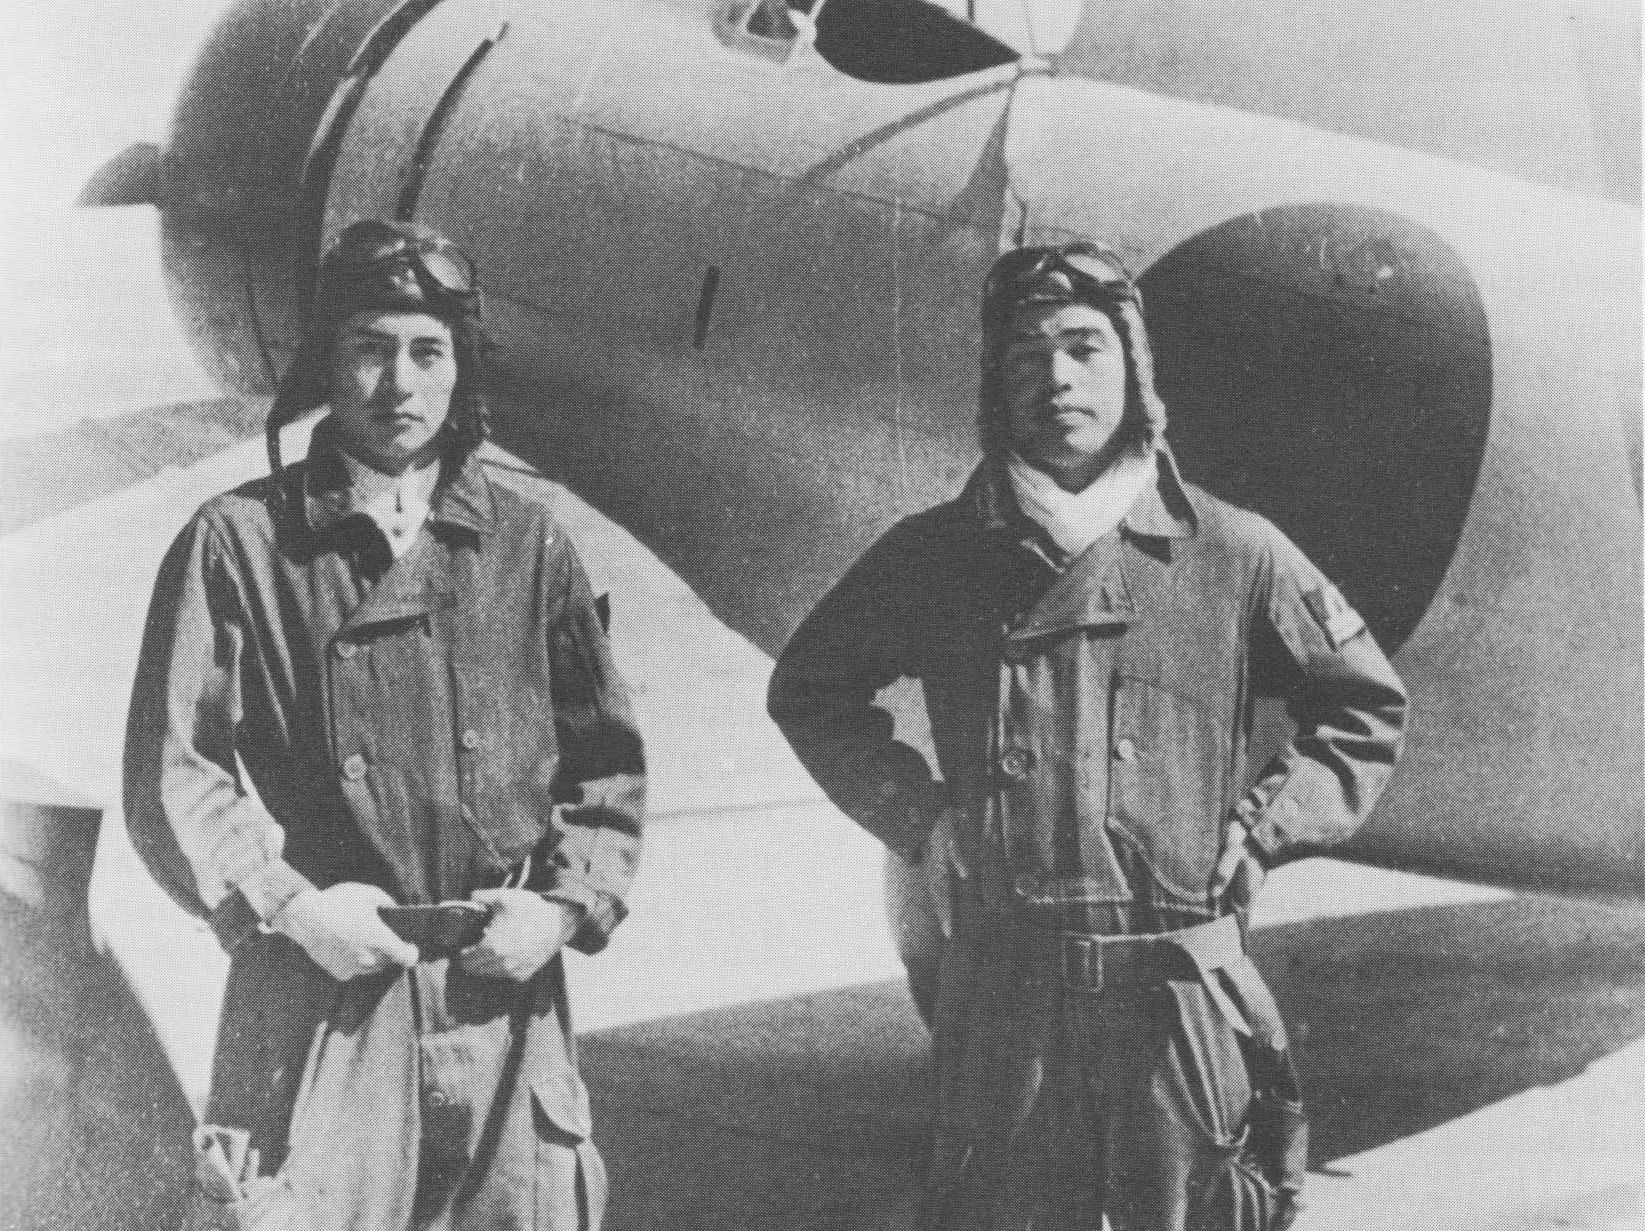 Japanese pilots Masao Asai and Masao Sato aboard carrier Akagi, 1938-1939; note A5M fighter in background